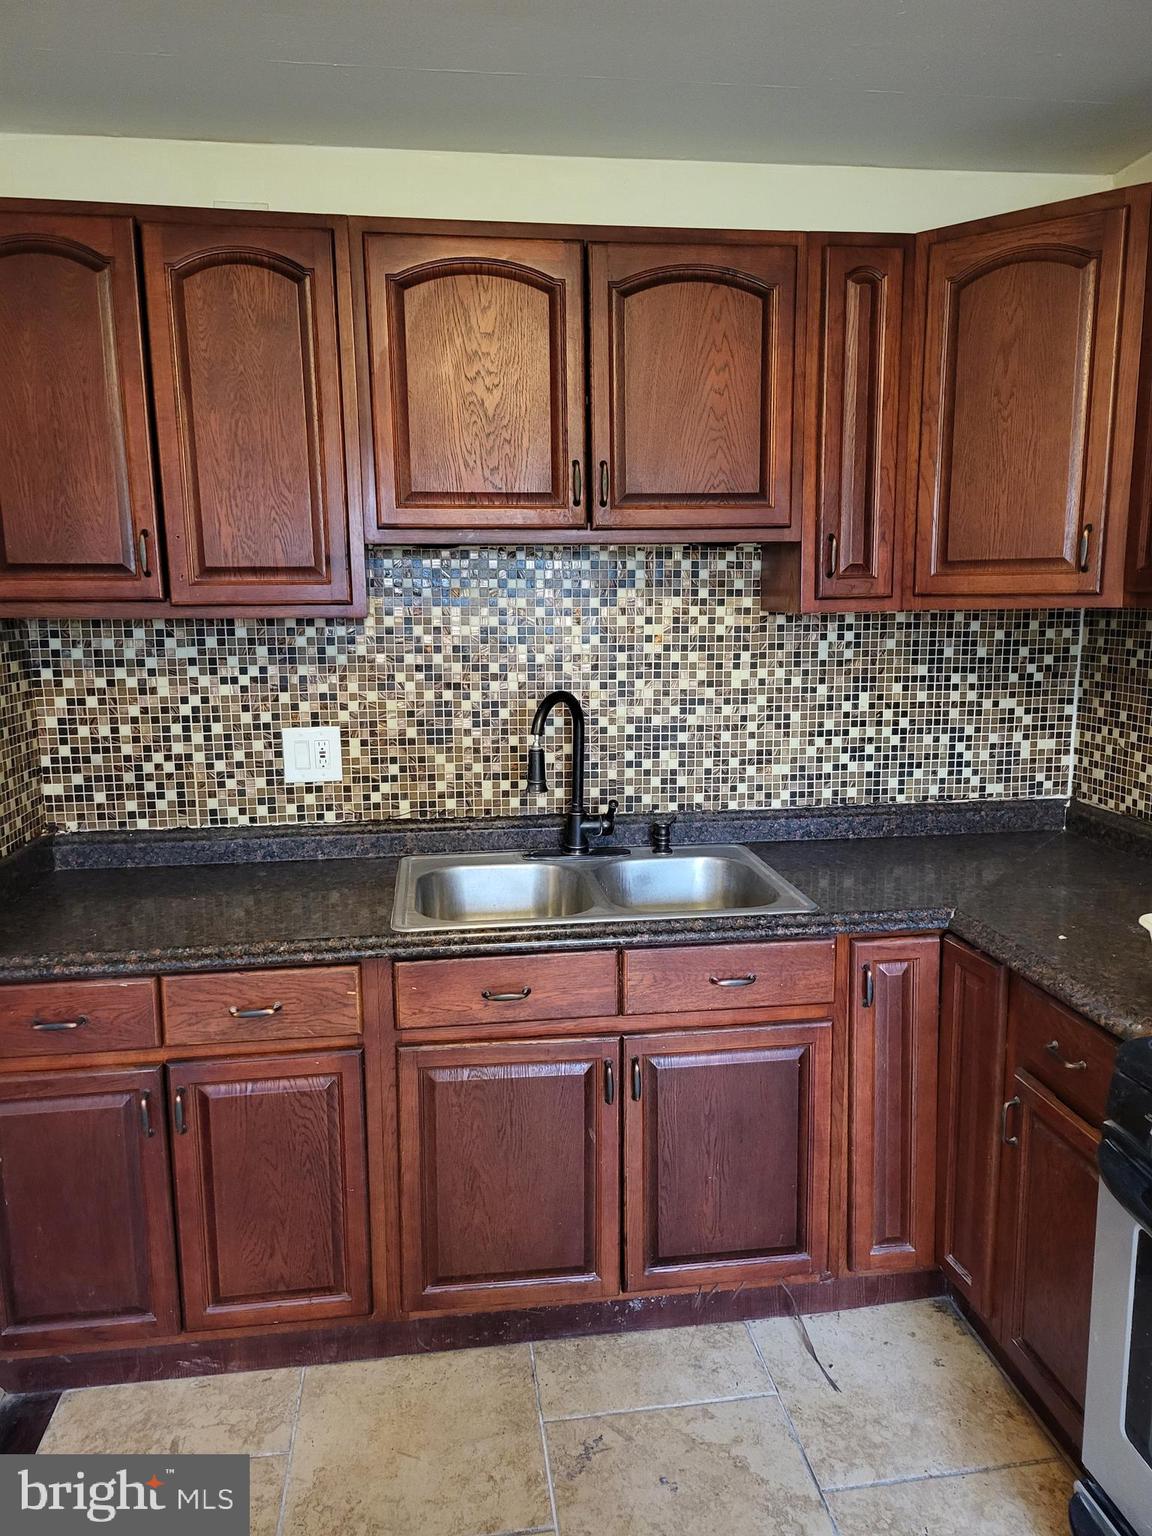 a kitchen with stainless steel appliances granite countertop wooden cabinets a sink and dishwasher